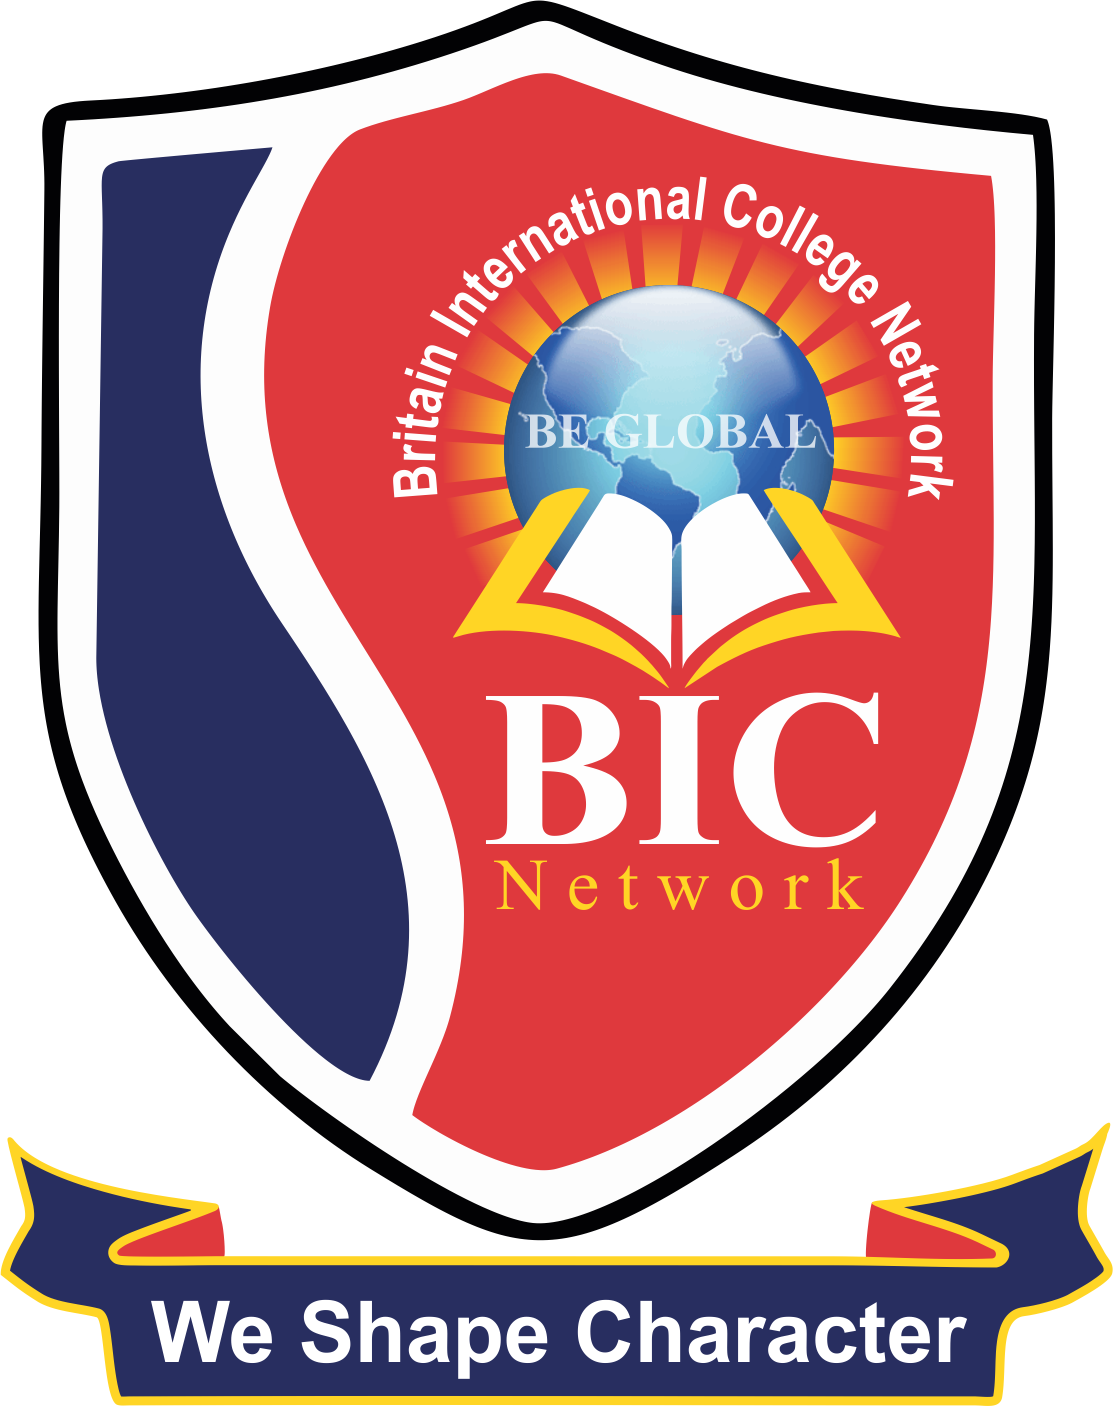 A Logo Of A College Network